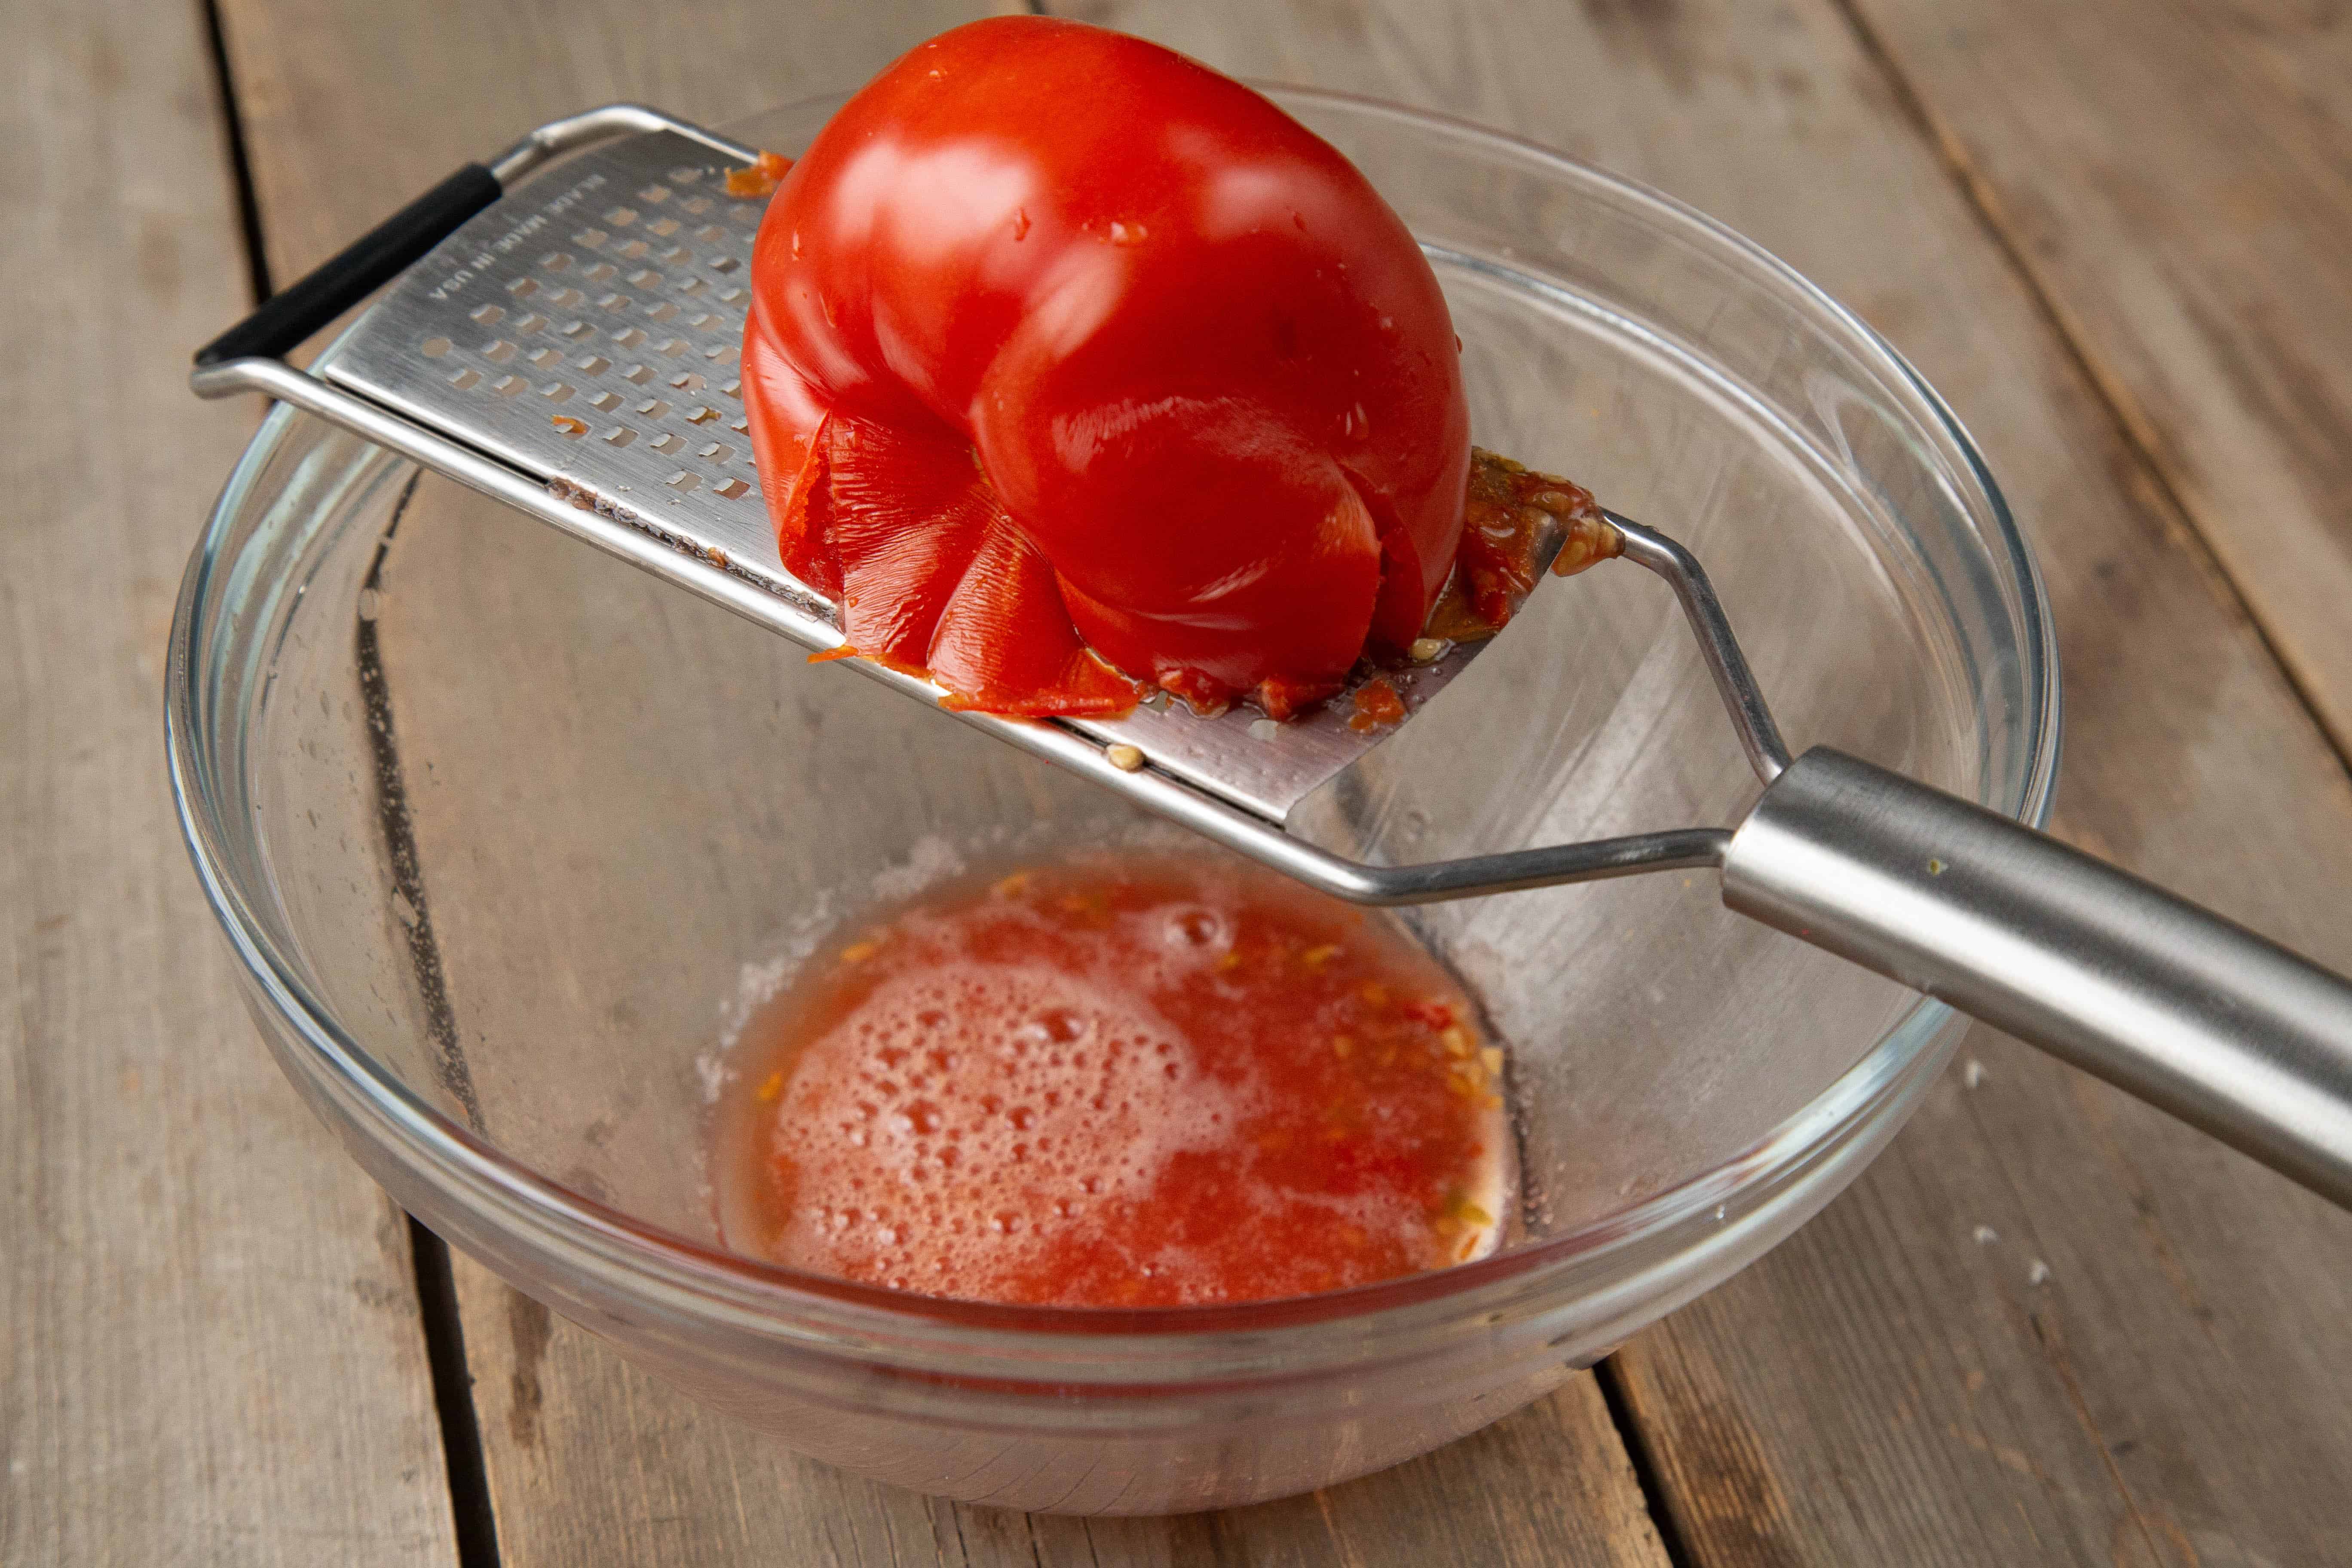 Grating a Tomato on a handheld grater over a glass bowl.